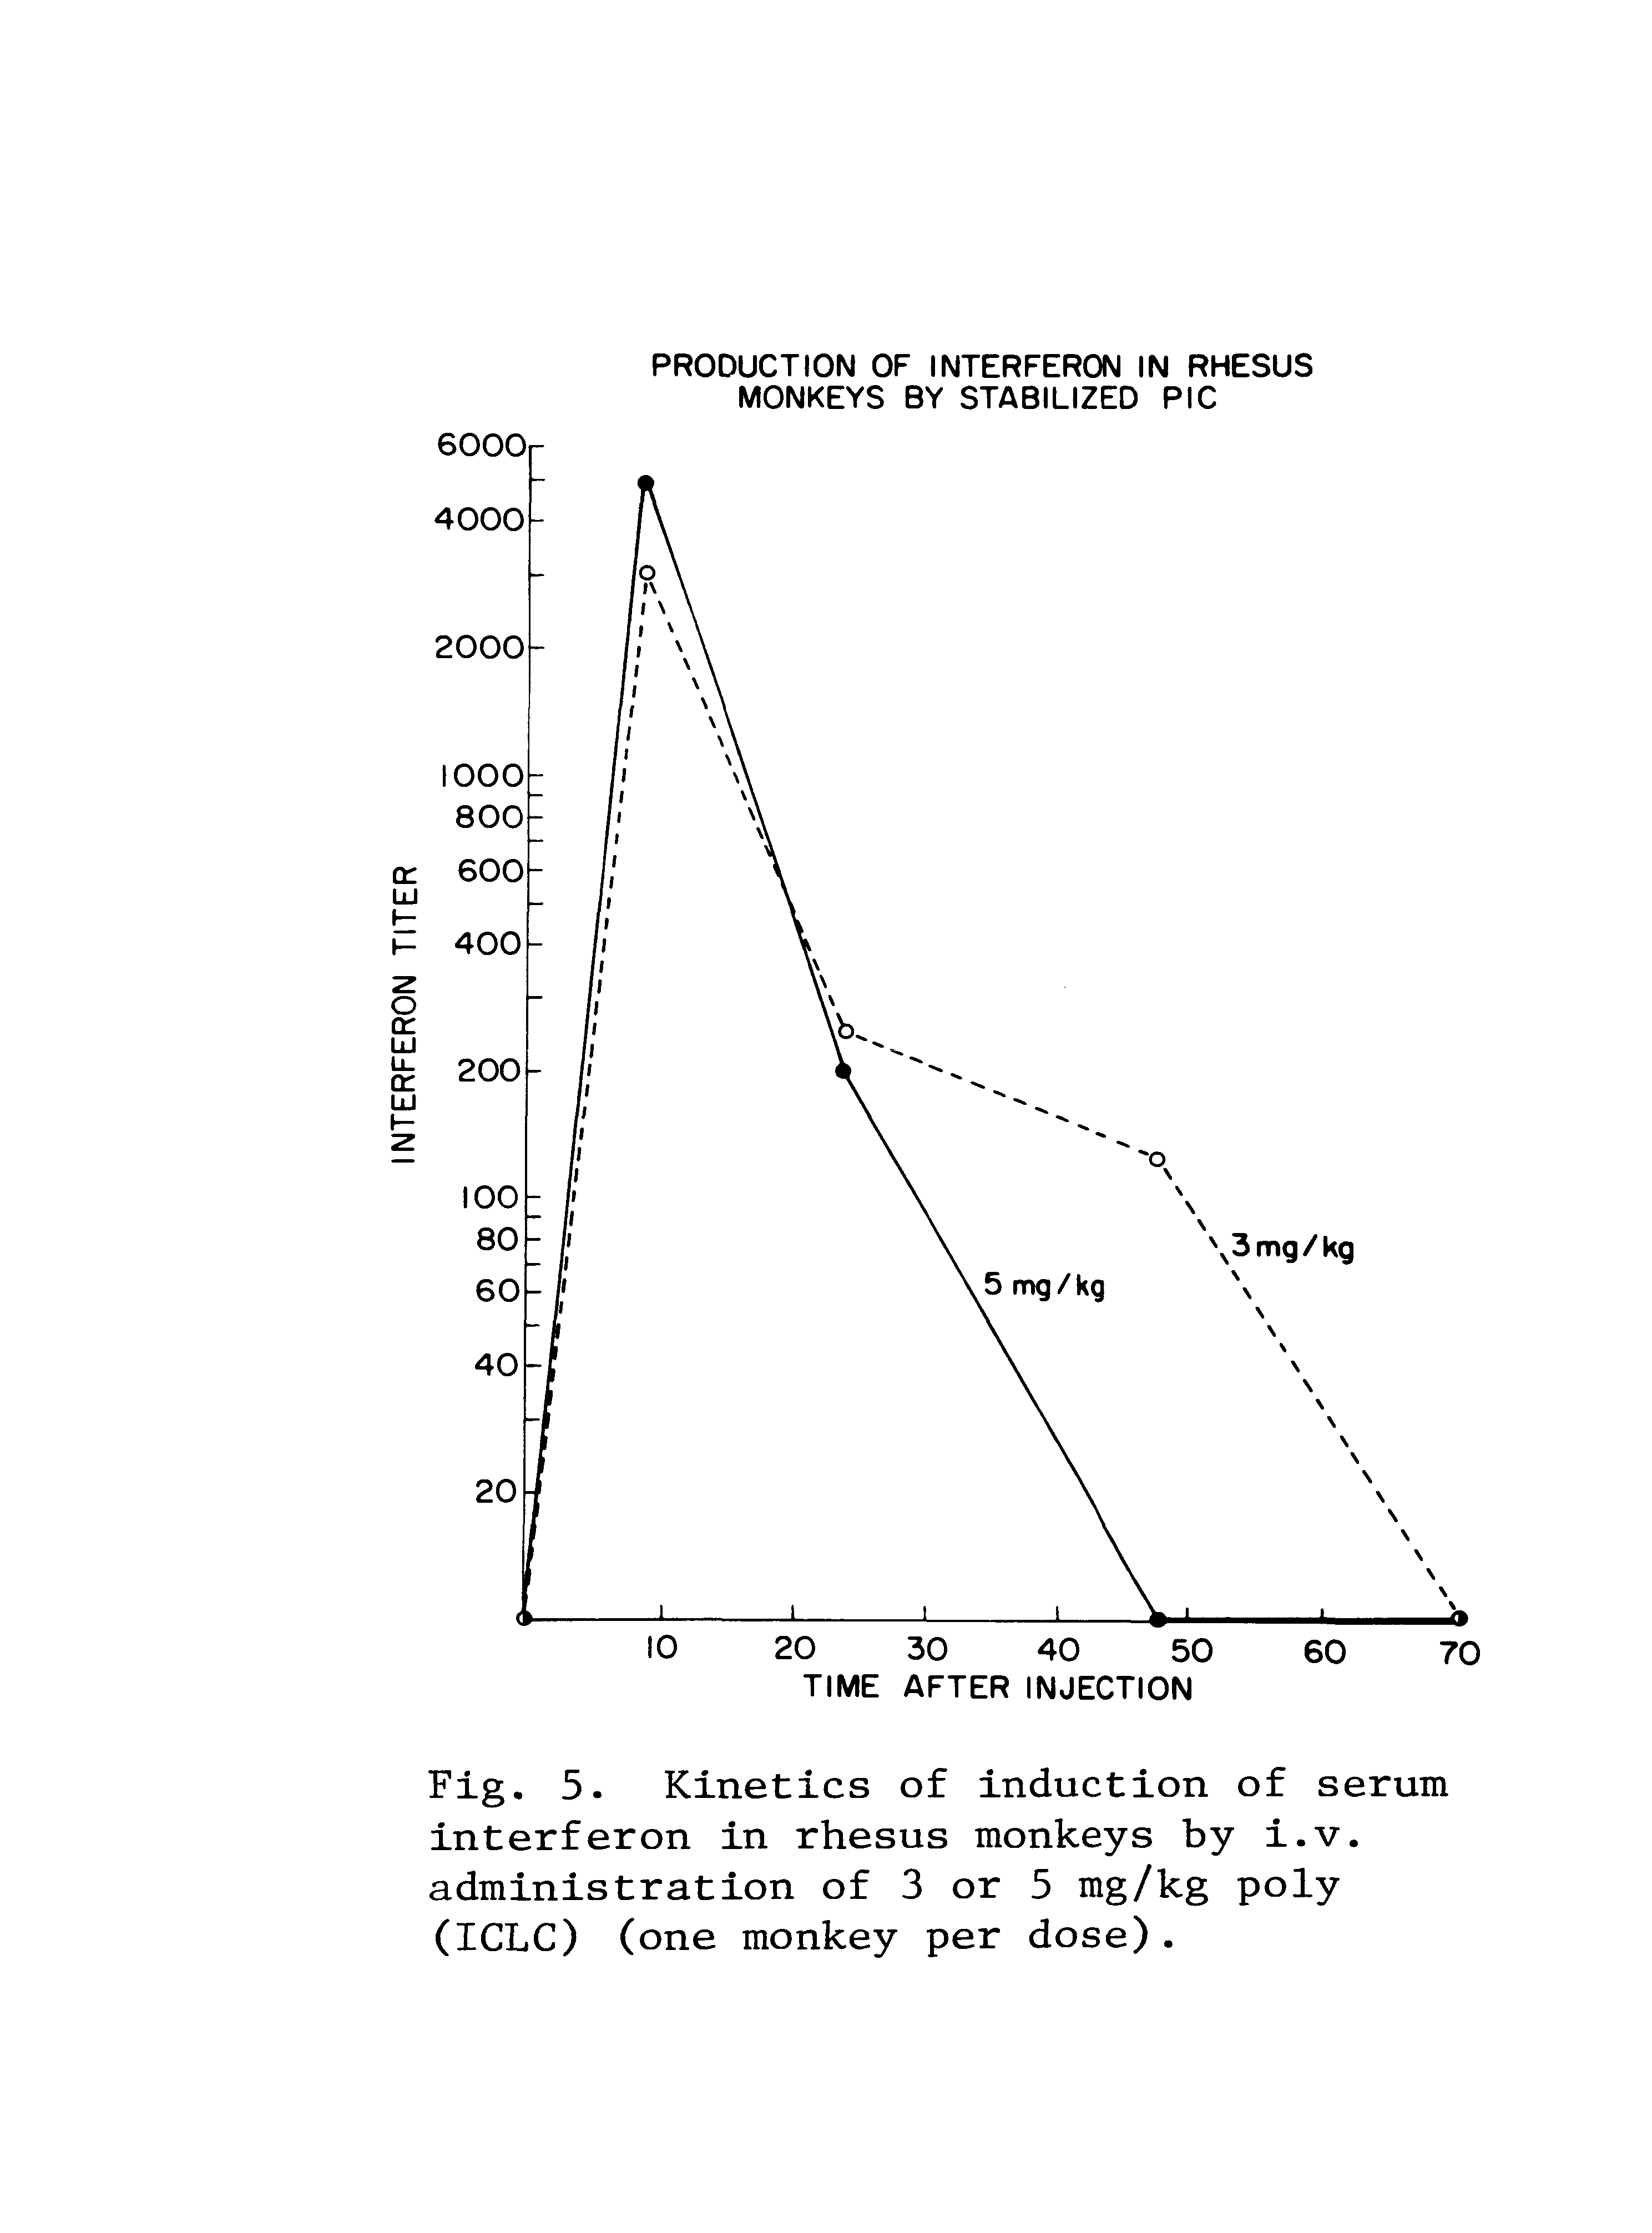 Fig. 5. Kinetics of induction of serum interferon in rhesus monkeys by i.v. administration of 3 or 5 mg/kg poly (ICLC) (one monkey per dose).